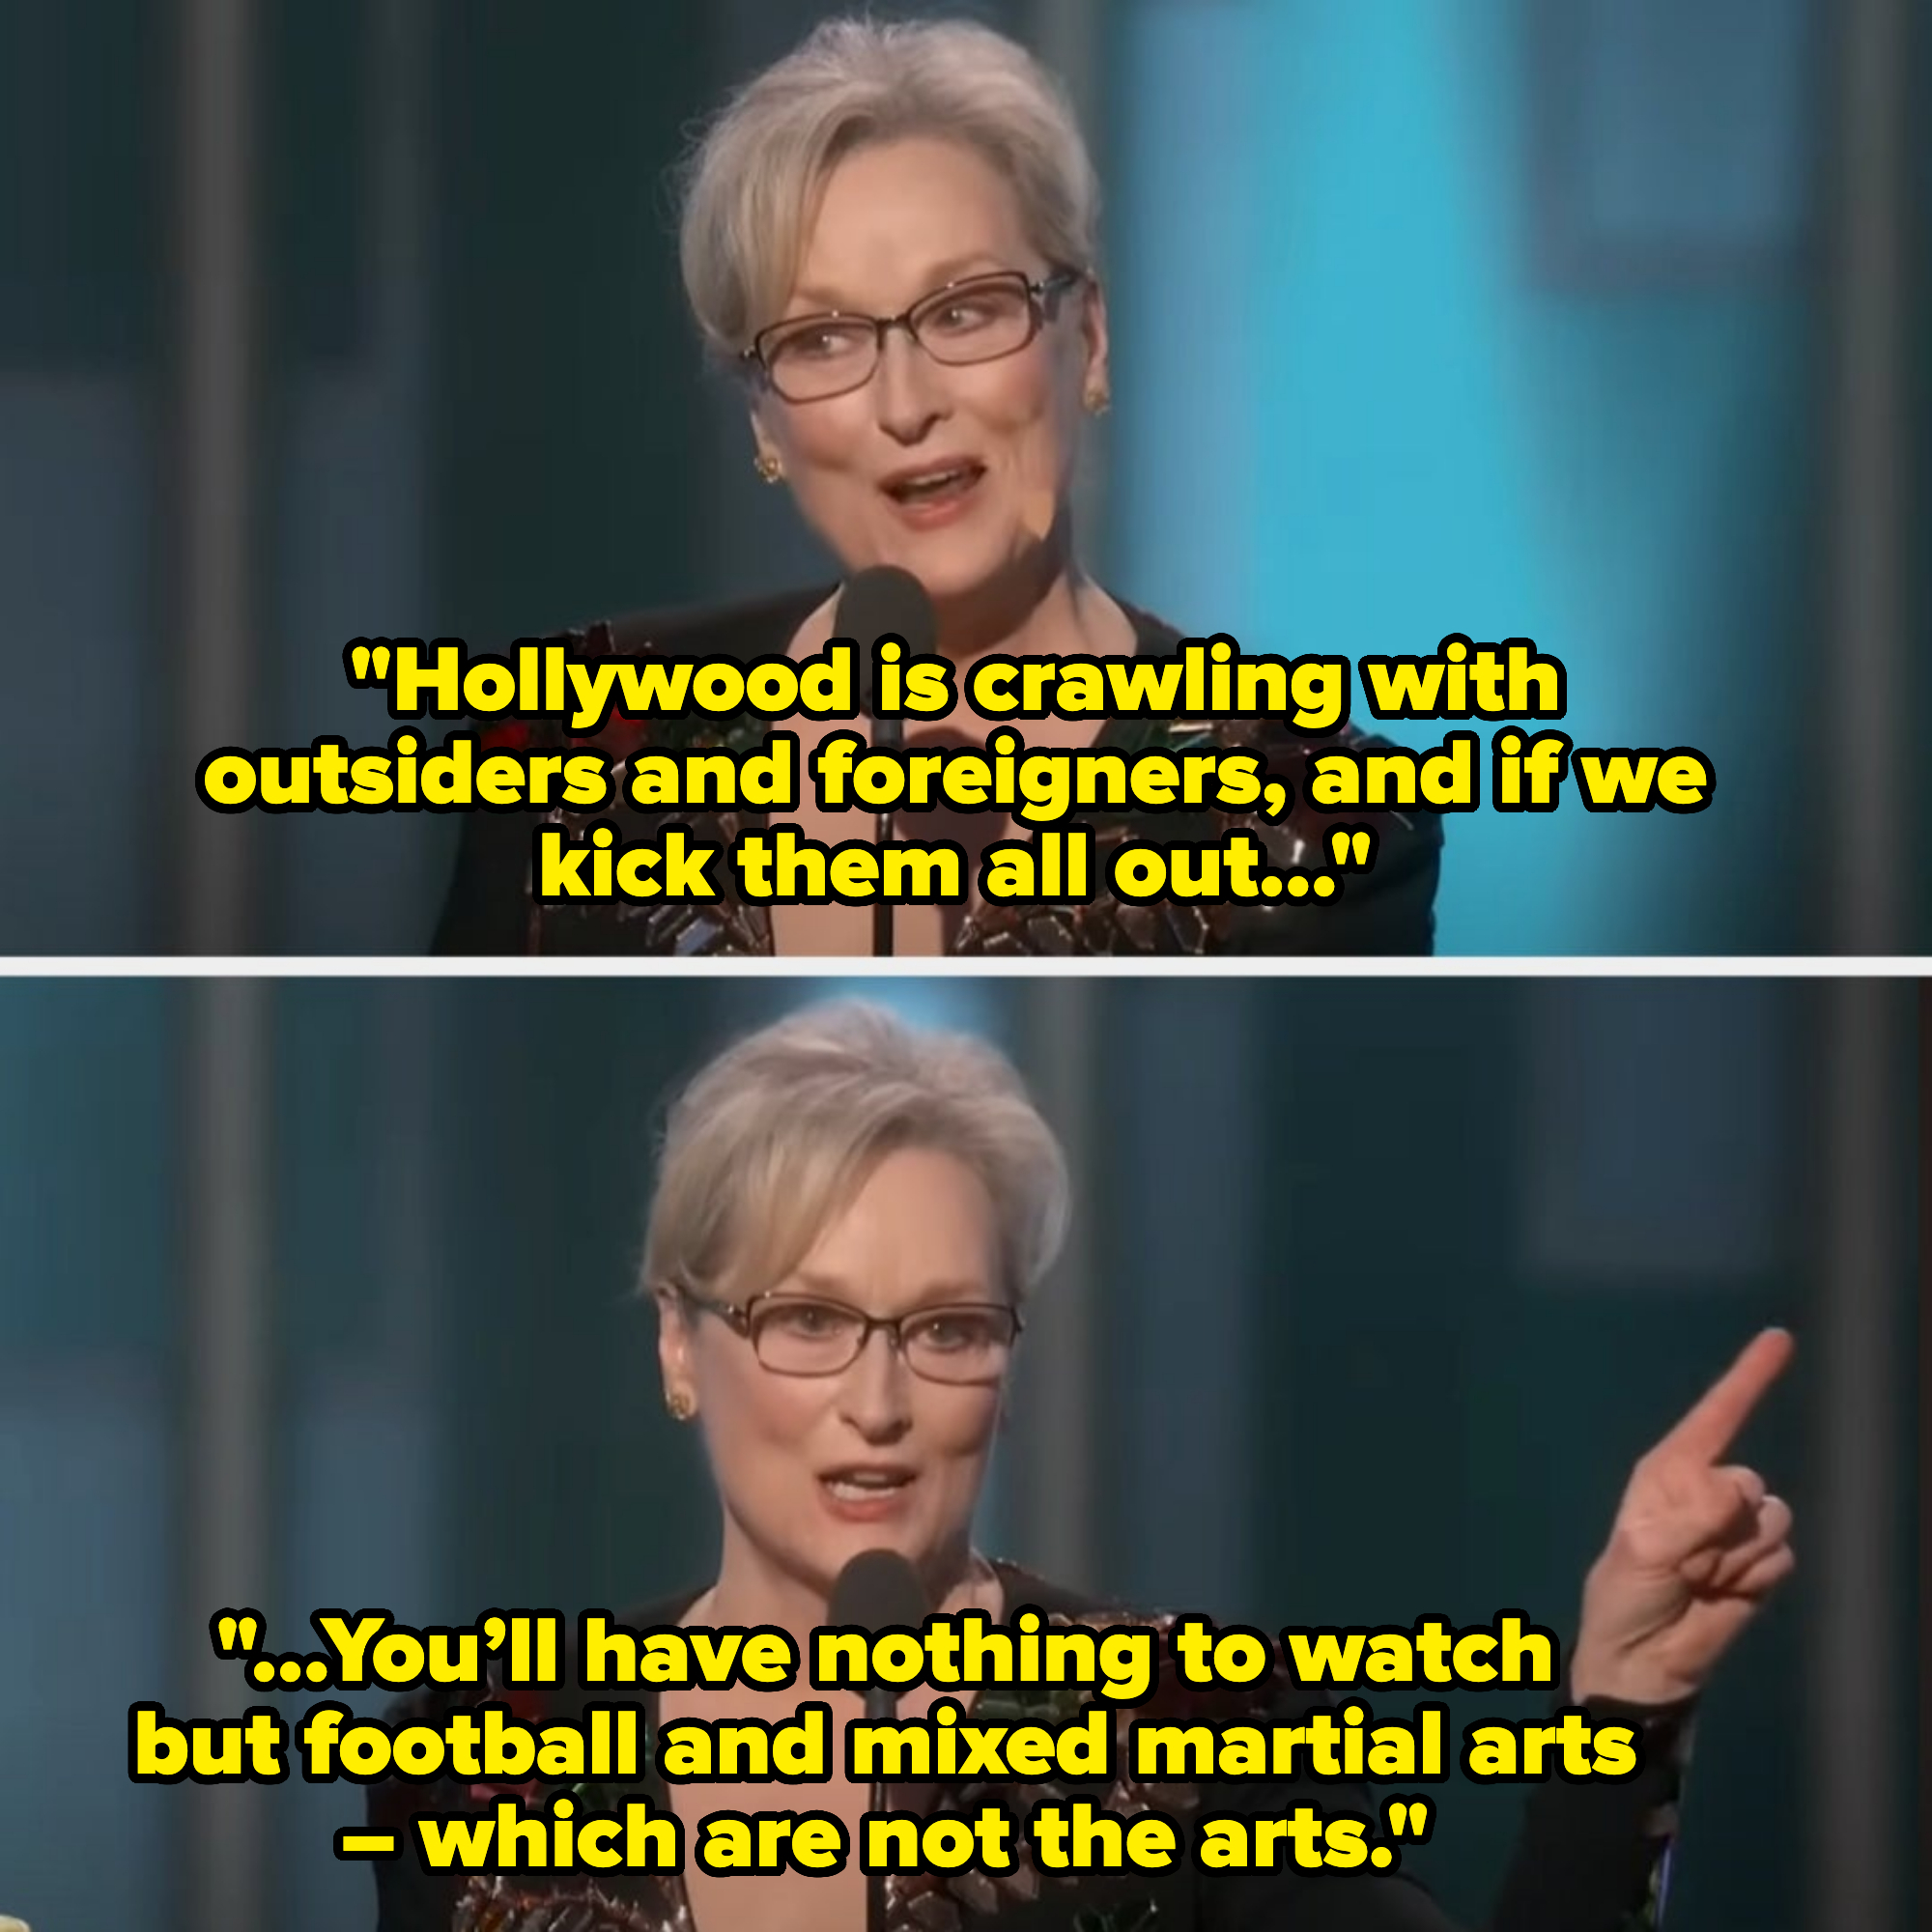 Meryl Streep speaking at a podium in a patterned dress, gesturing with her right hand